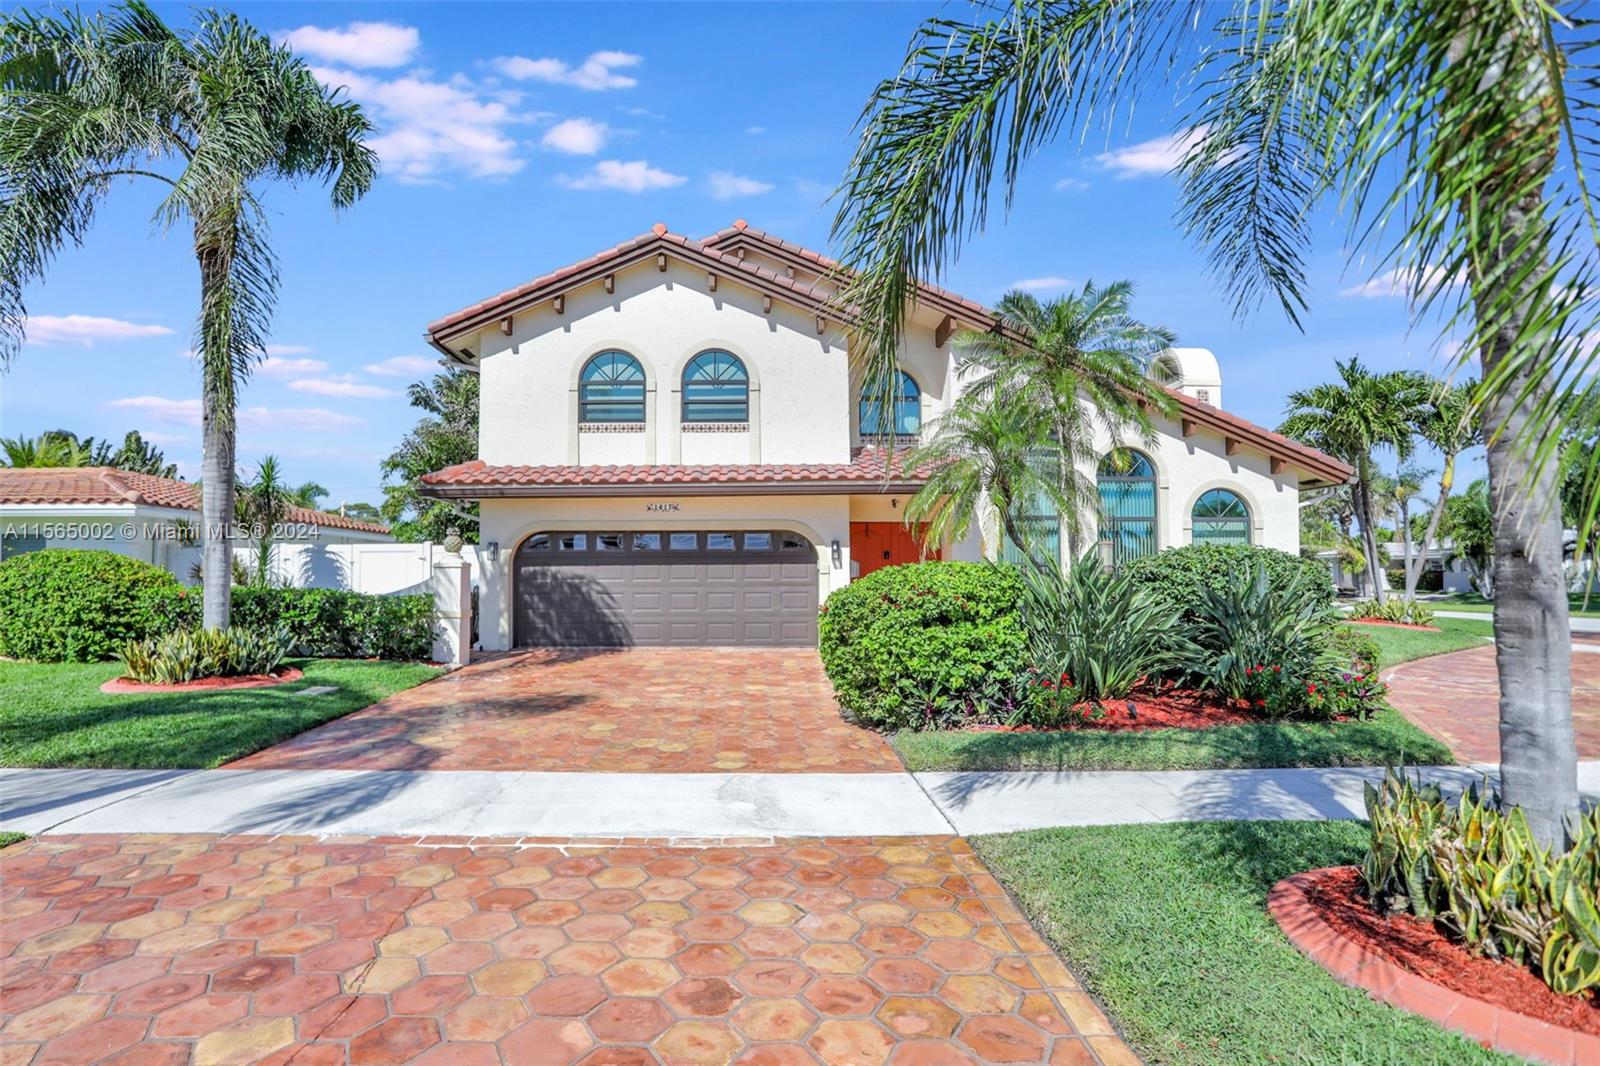 Beautiful 4 BR/ 3.5 BA pool home located on prime corner lot near the intracoastal in the prestigious Sunset East neighborhood. As you enter through the double doors you find custom marble flooring in main living areas, vaulted ceilings, wet bar, brick fireplace, arched windows & a grand staircase. Make your way to the kitchen which offers large cooking island, wood cabinets, granite counters, double ovens & new SS refrigerator. Retreat to your patio & pool area which is perfect for your morning cup of coffee or entertaining. Also features an oversized master suite with balcony overlooking the pool. The master bath features a large whirlpool tub, dual sinks and separate shower. Offers 2nd floor guest suite & two bedrooms on 1st floor. New roof in 2020, partial Impact windows & generator.